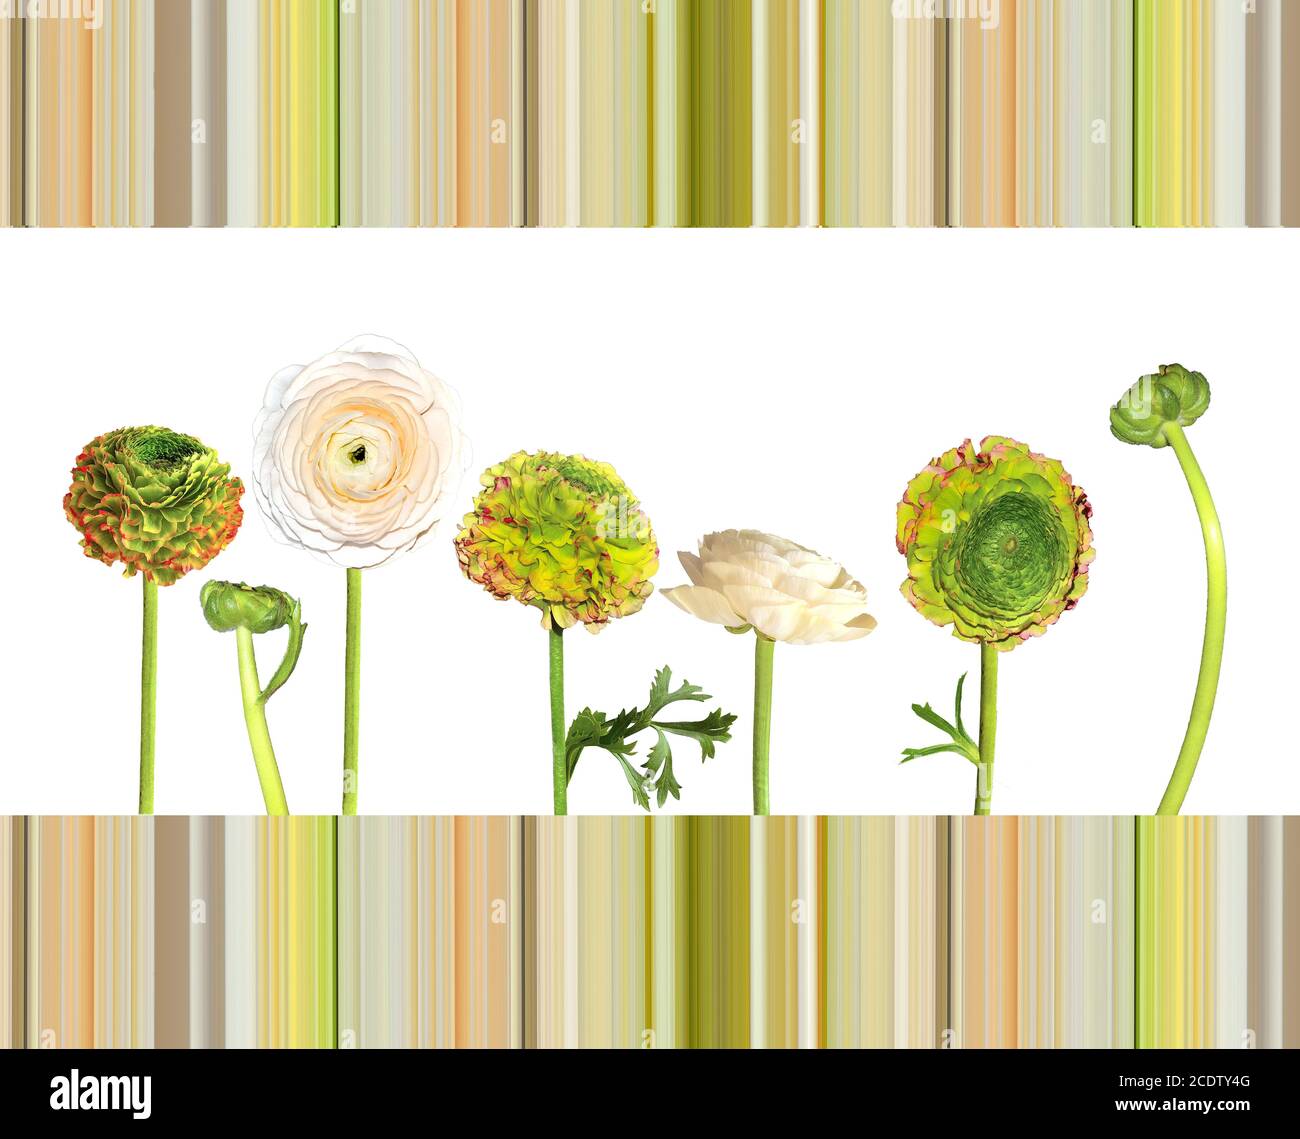 Floral background with ranunculus flowers isolated on white Stock Photo